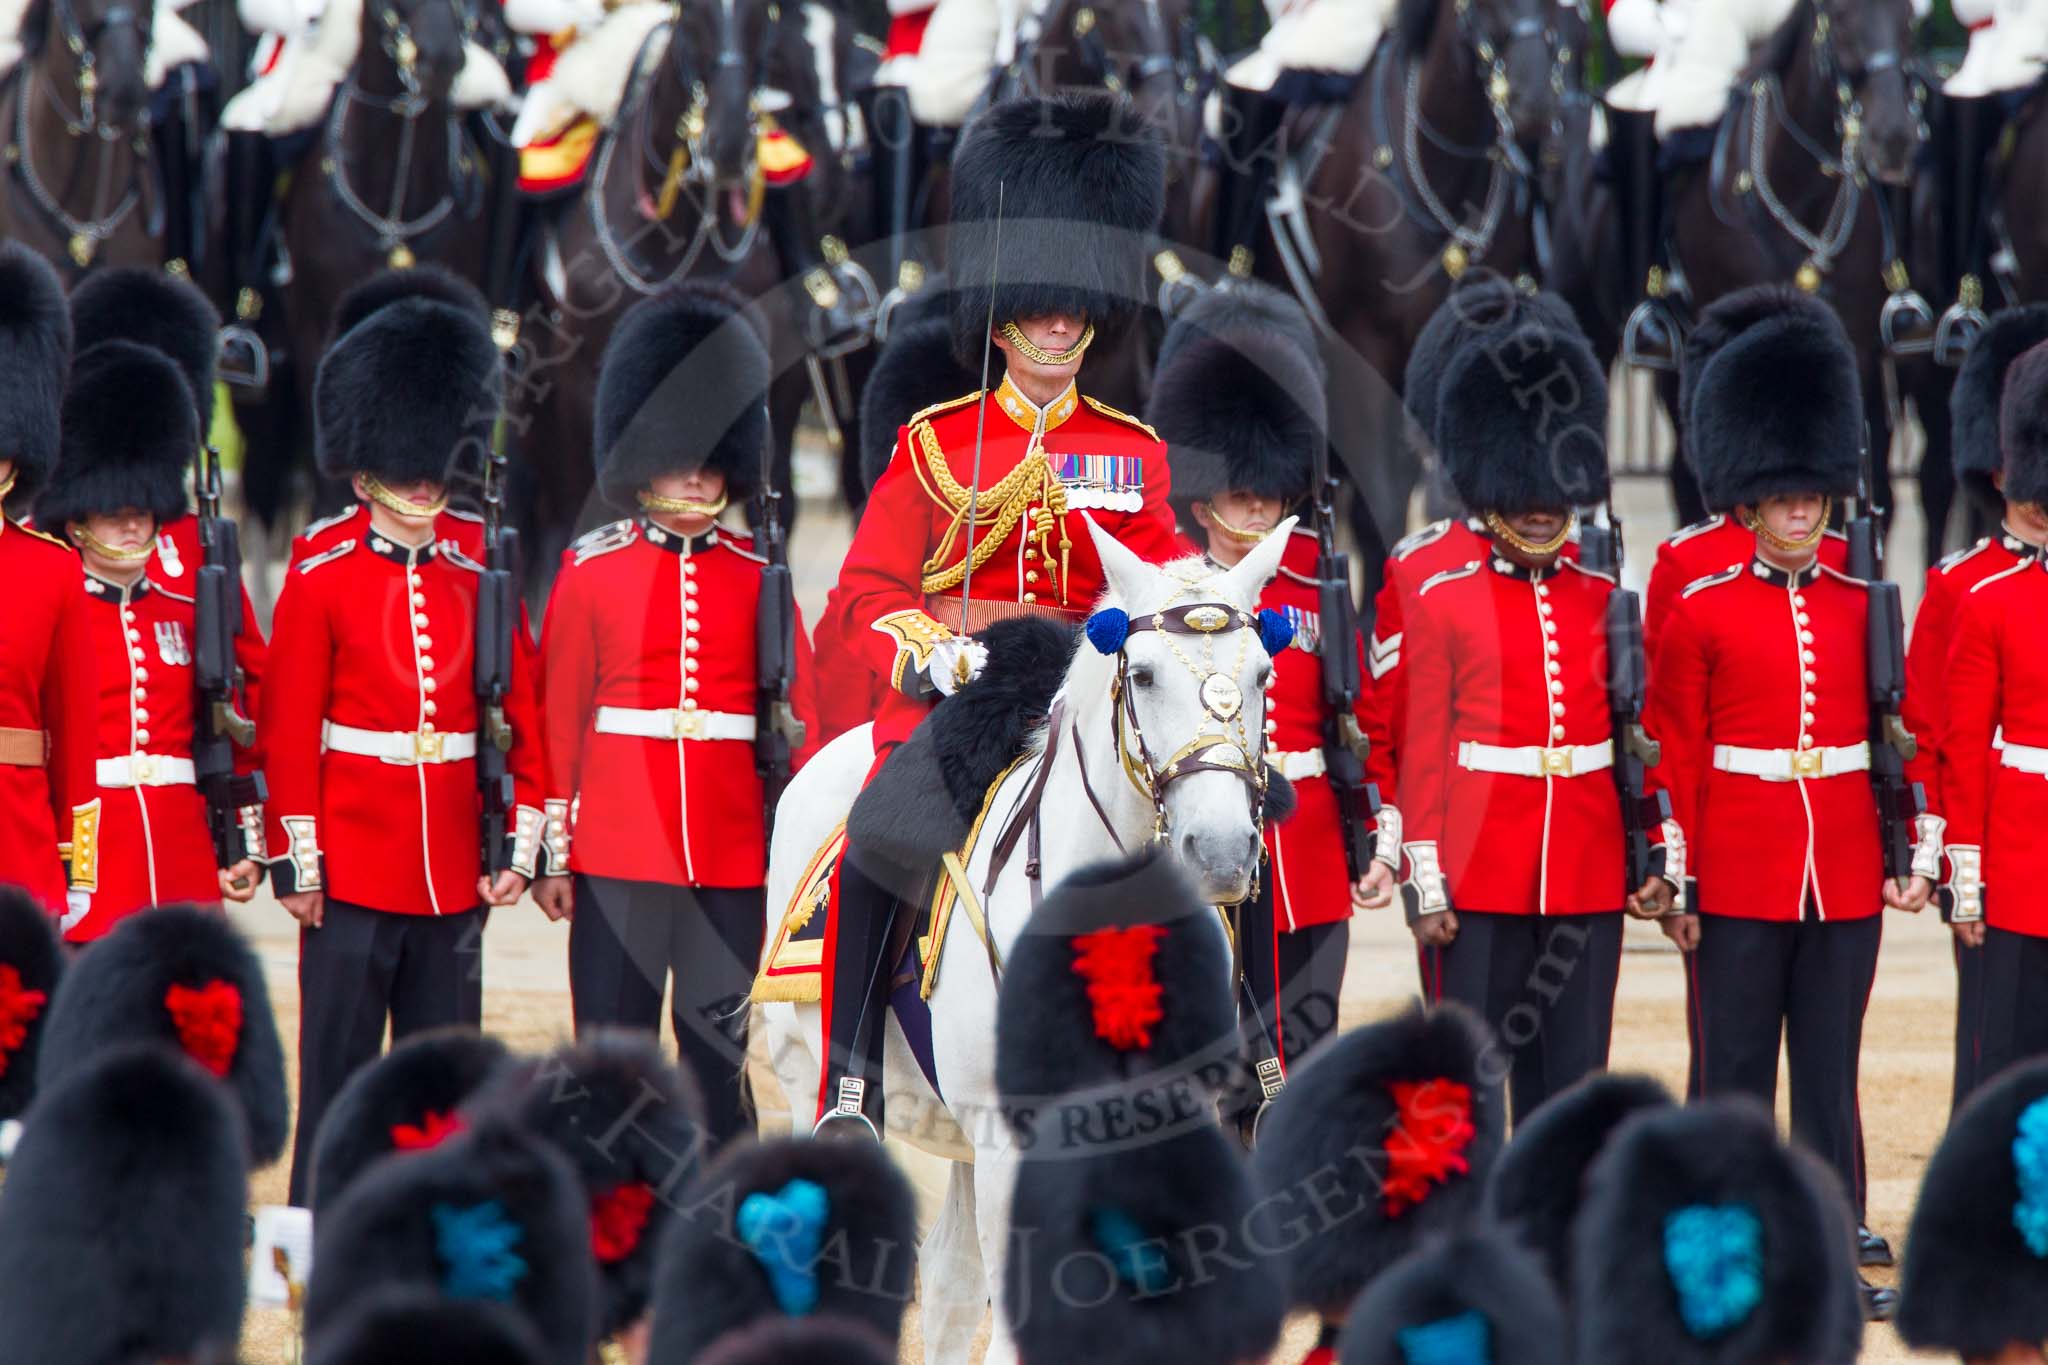 Trooping the Colour 2014.
Horse Guards Parade, Westminster,
London SW1A,

United Kingdom,
on 14 June 2014 at 11:17, image #499